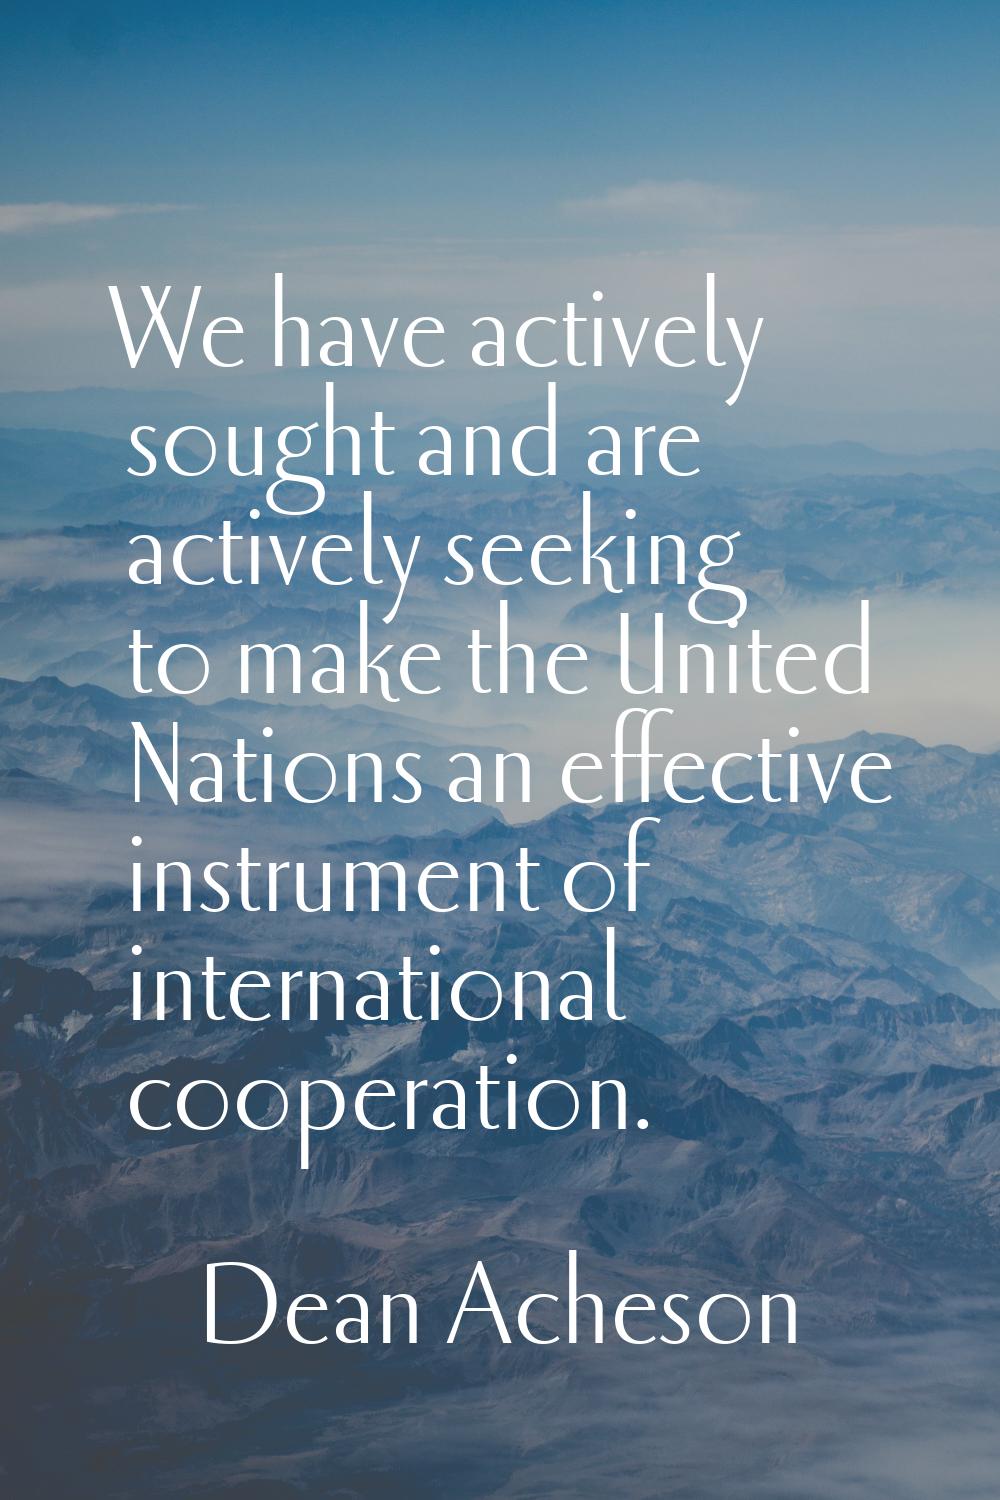 We have actively sought and are actively seeking to make the United Nations an effective instrument